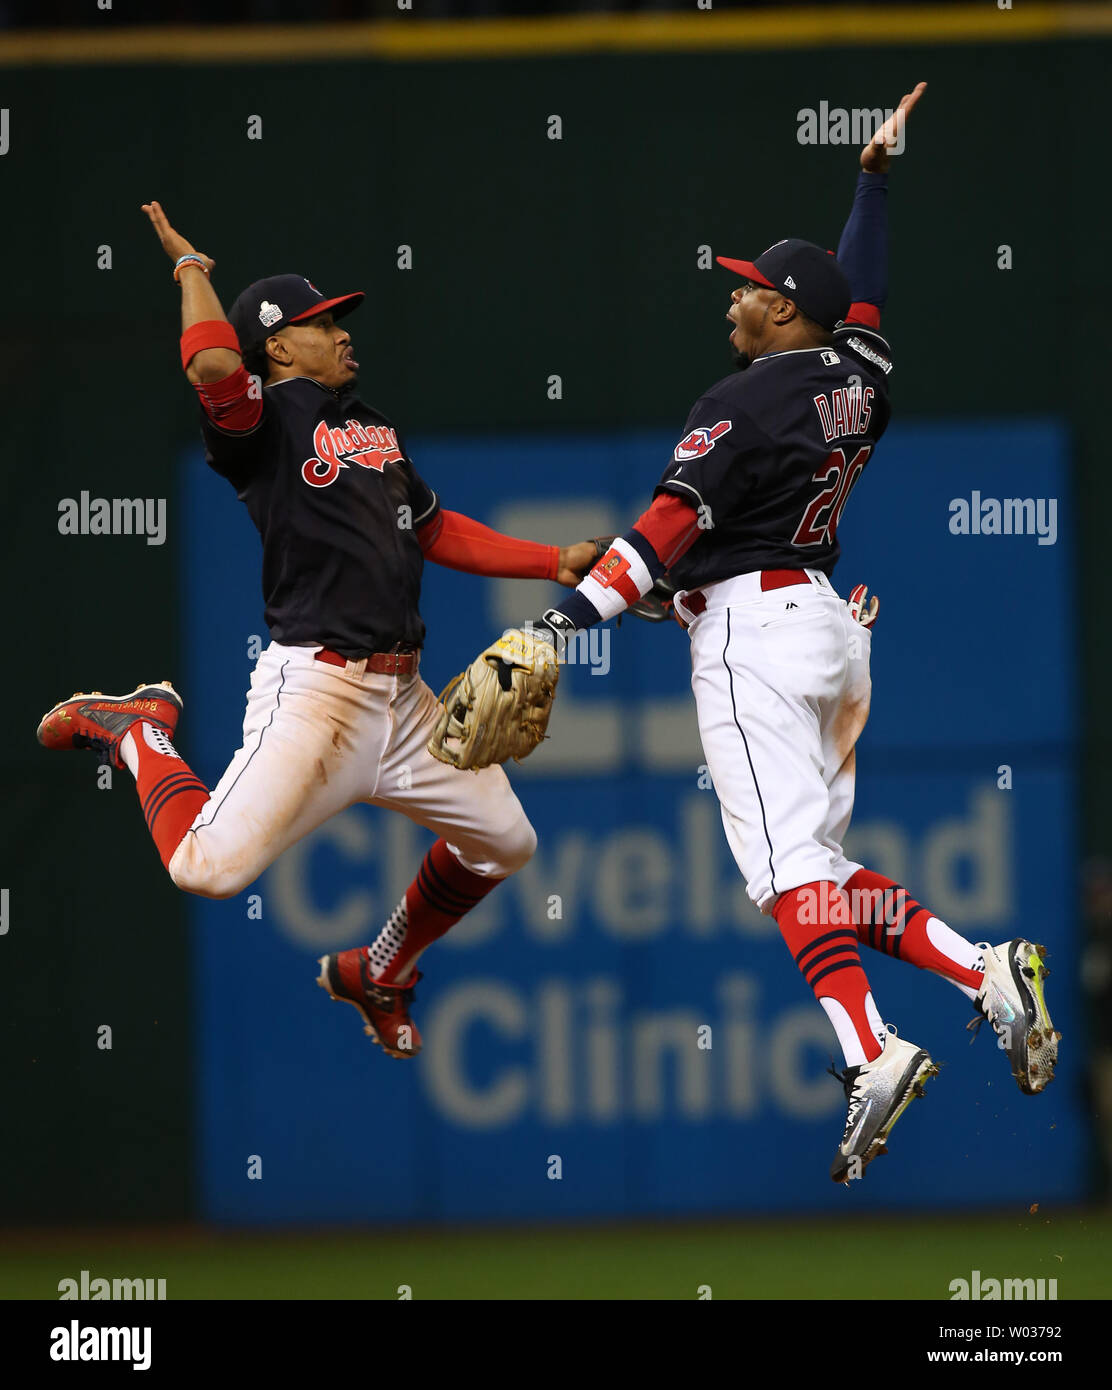 Cleveland Indians Francisco Lindor (L) and Rajai Davis leap to celebrate  winning game 1 of the World Series against the Chicago Cubs at Progressive  Field in Cleveland, Ohio, on October 25, 2016.